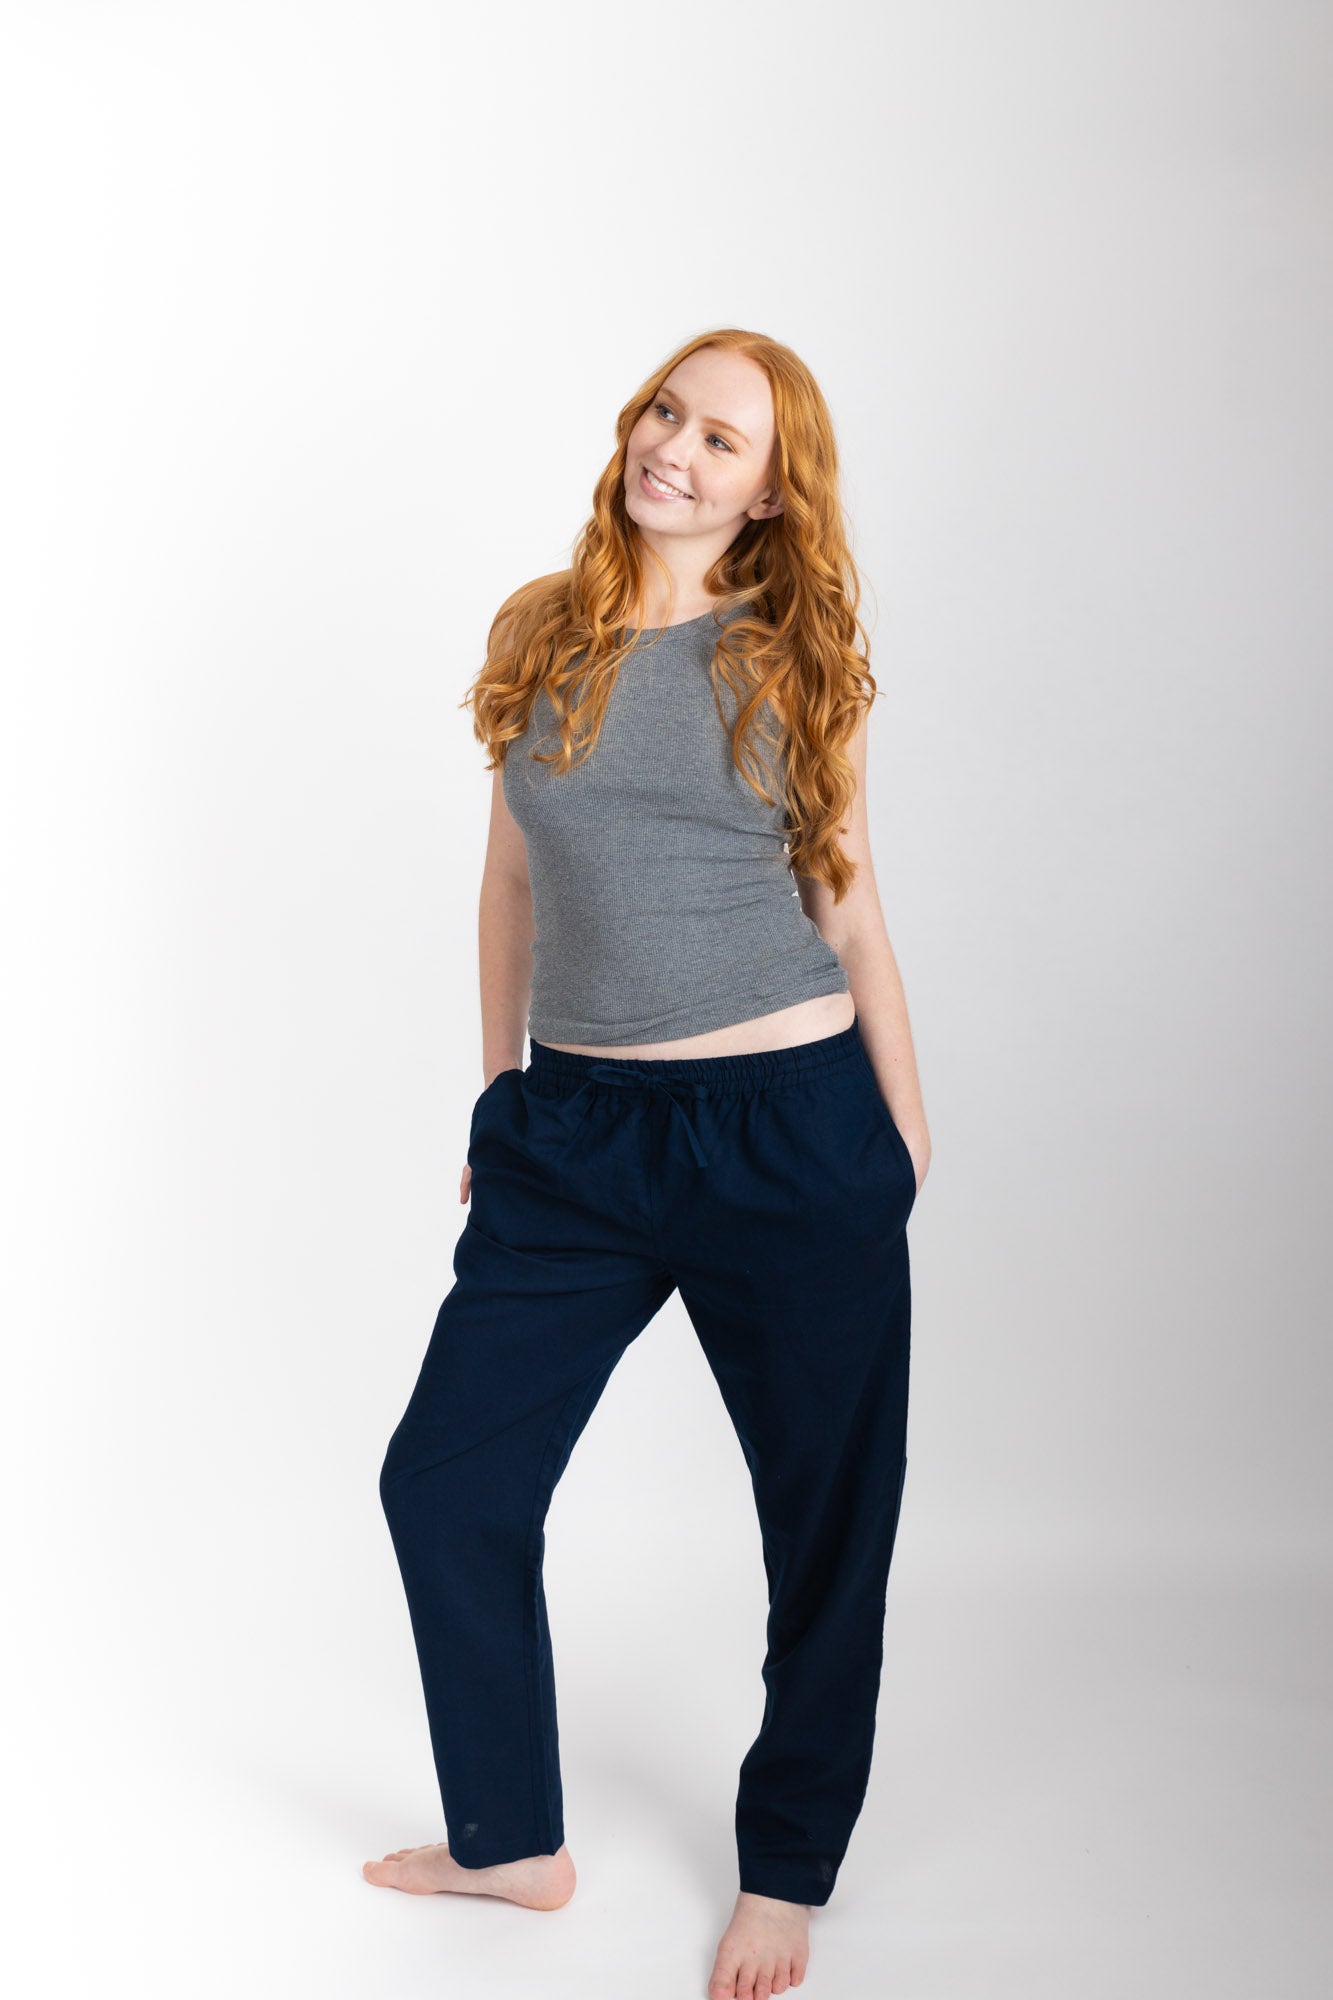 Women’s pyjama pant.  Made from an organic cotton and linen blend, in Navy.  These pants feature an elasticated waistband with a drawstring for comfort.